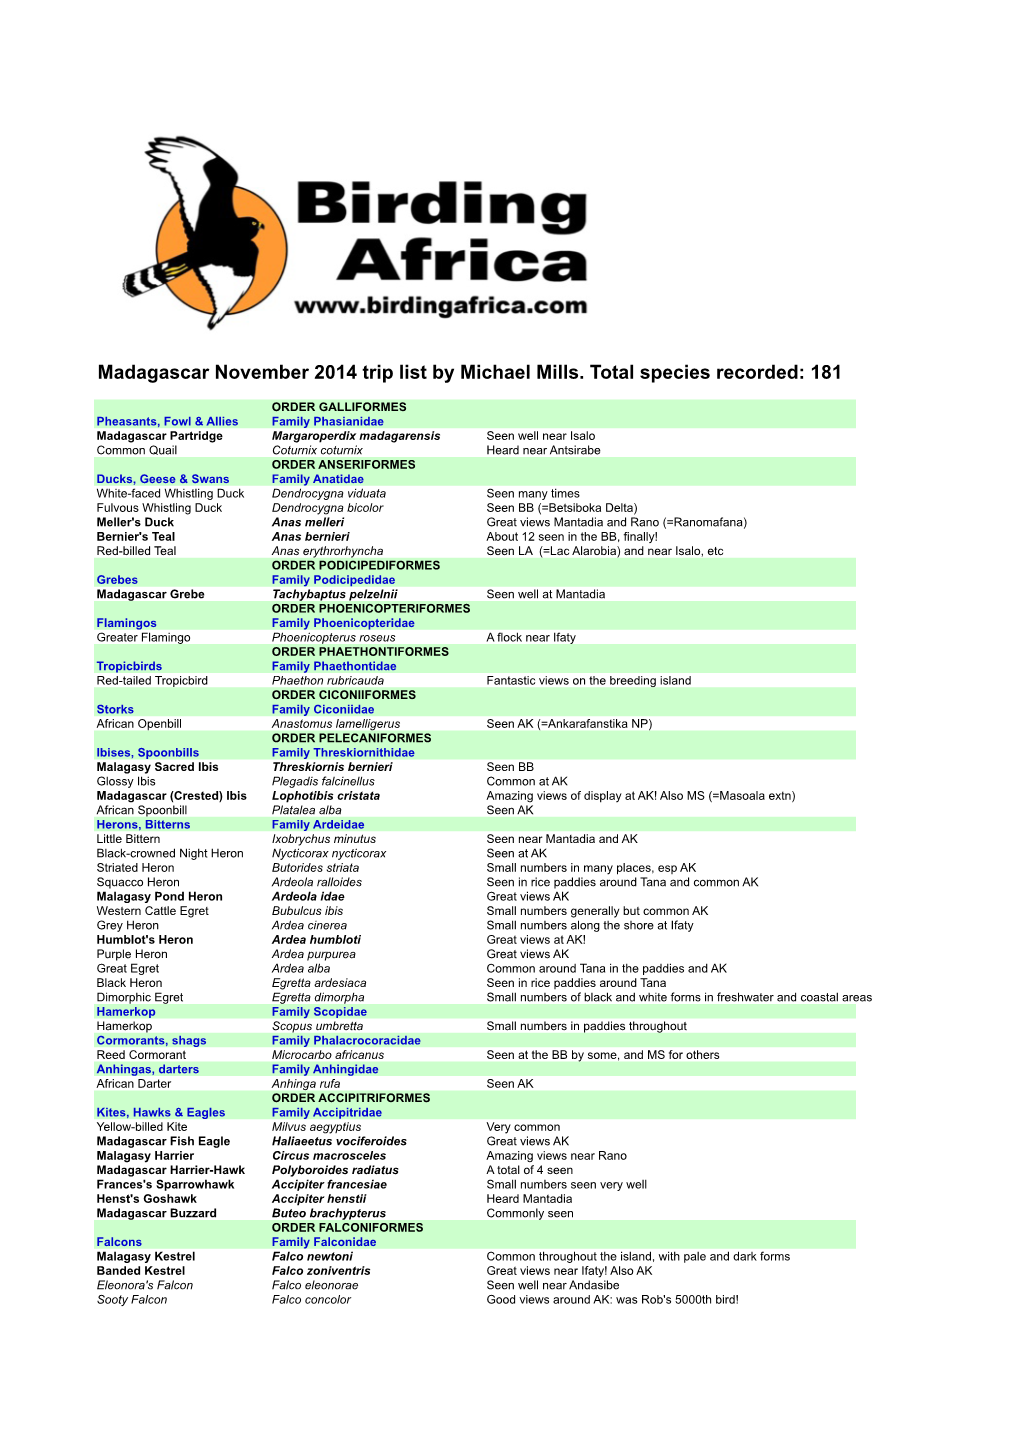 Madagascar November 2014 Trip List by Michael Mills. Total Species Recorded: 181